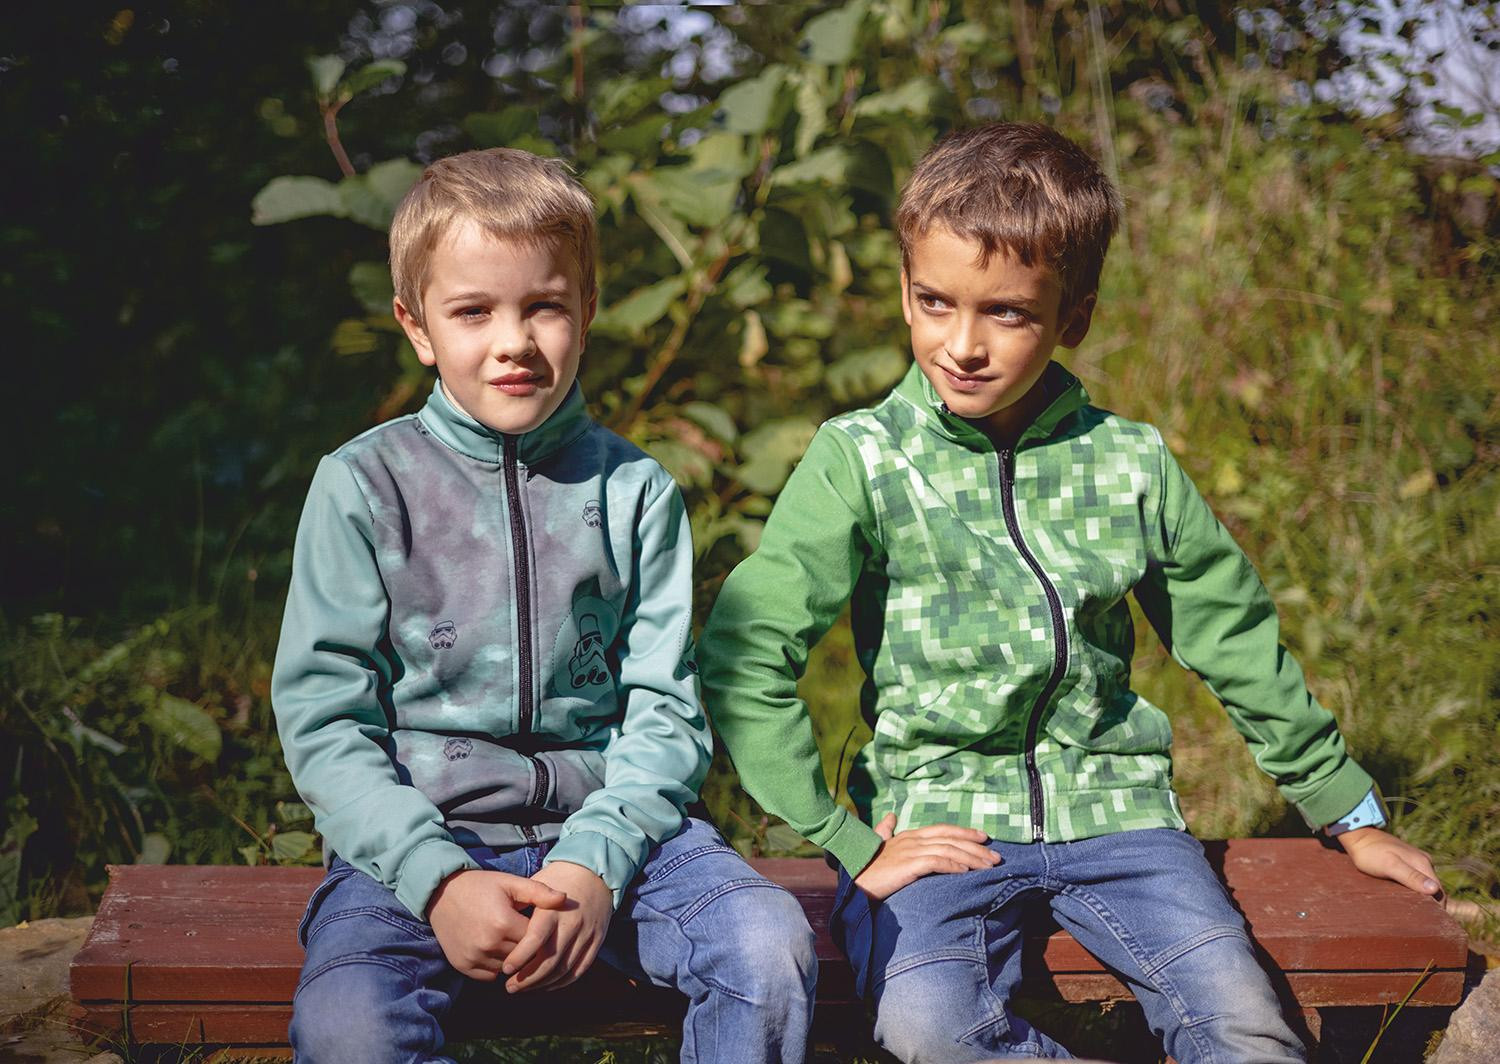 "MAX" CHILDREN'S TRAINING JACKET - CAMOUFLAGE COLORFUL - knit with short nap